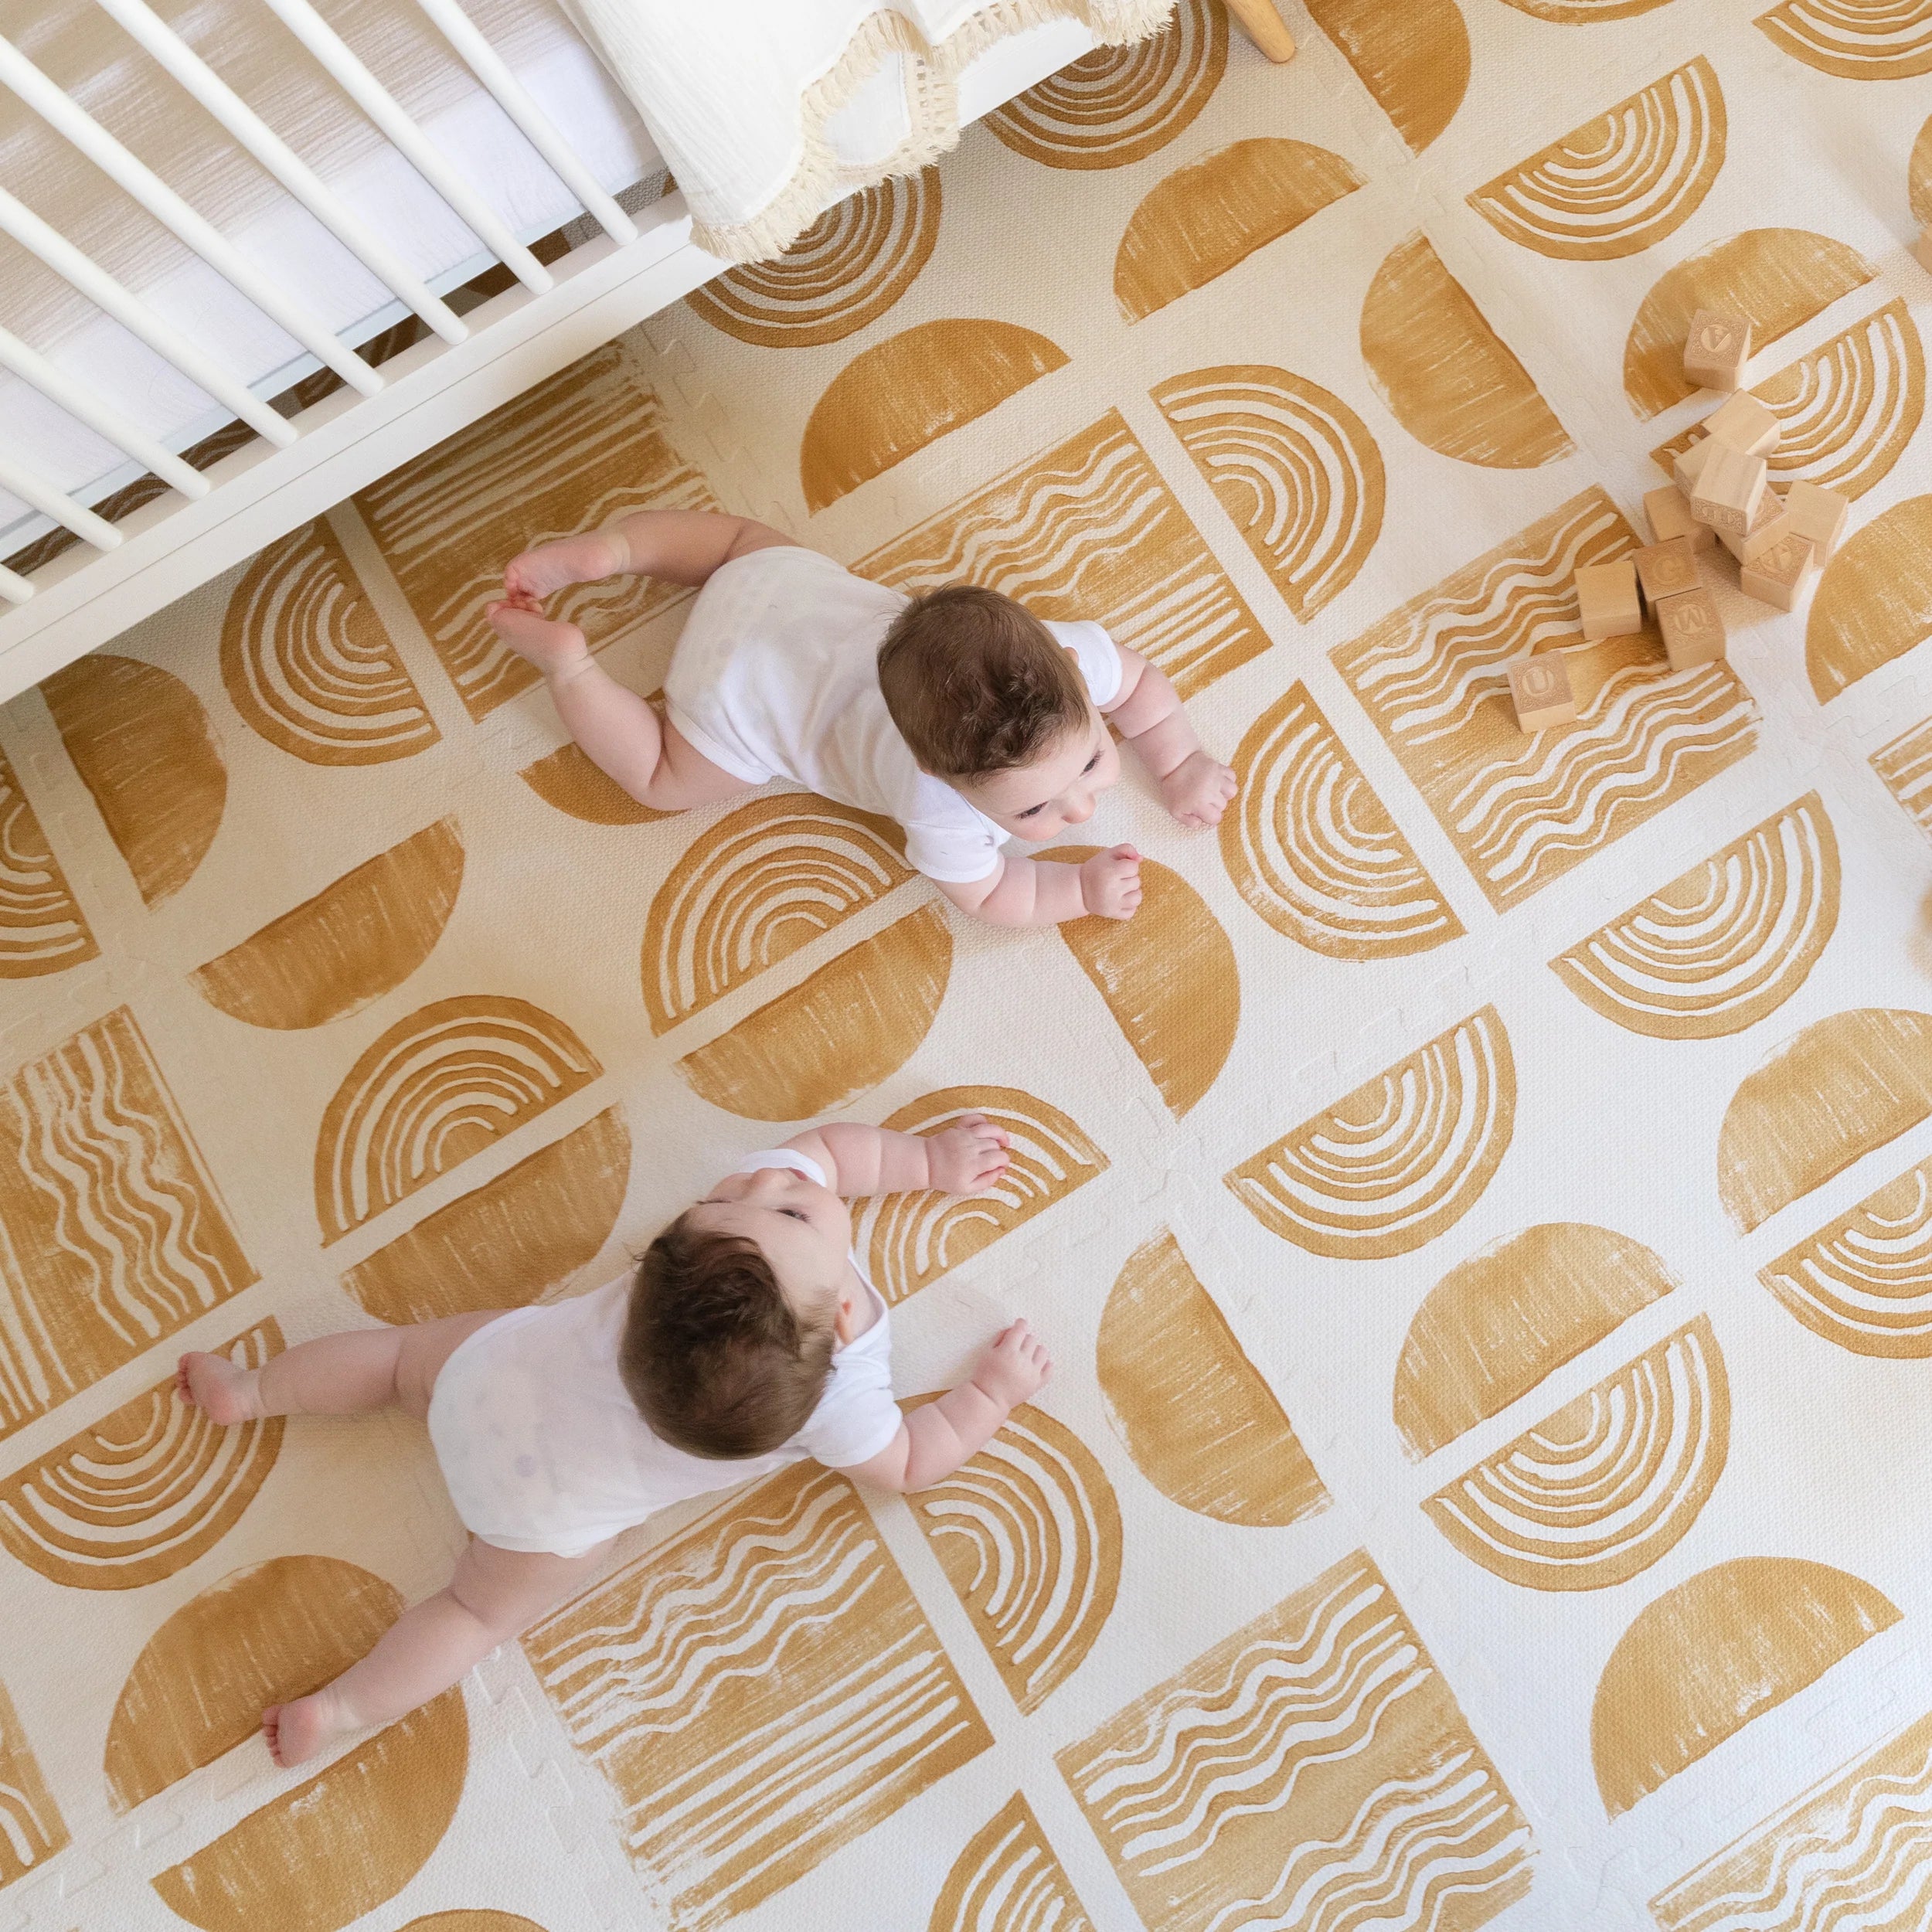 
Exceeds Safety Standards
Safe For Baby
Our play mats are made of premium-quality, non-toxic EVA foam and printed top film layer and are rigorously tested to meet and exceed the US Safety Standard and EU Toy Directive requirements.
